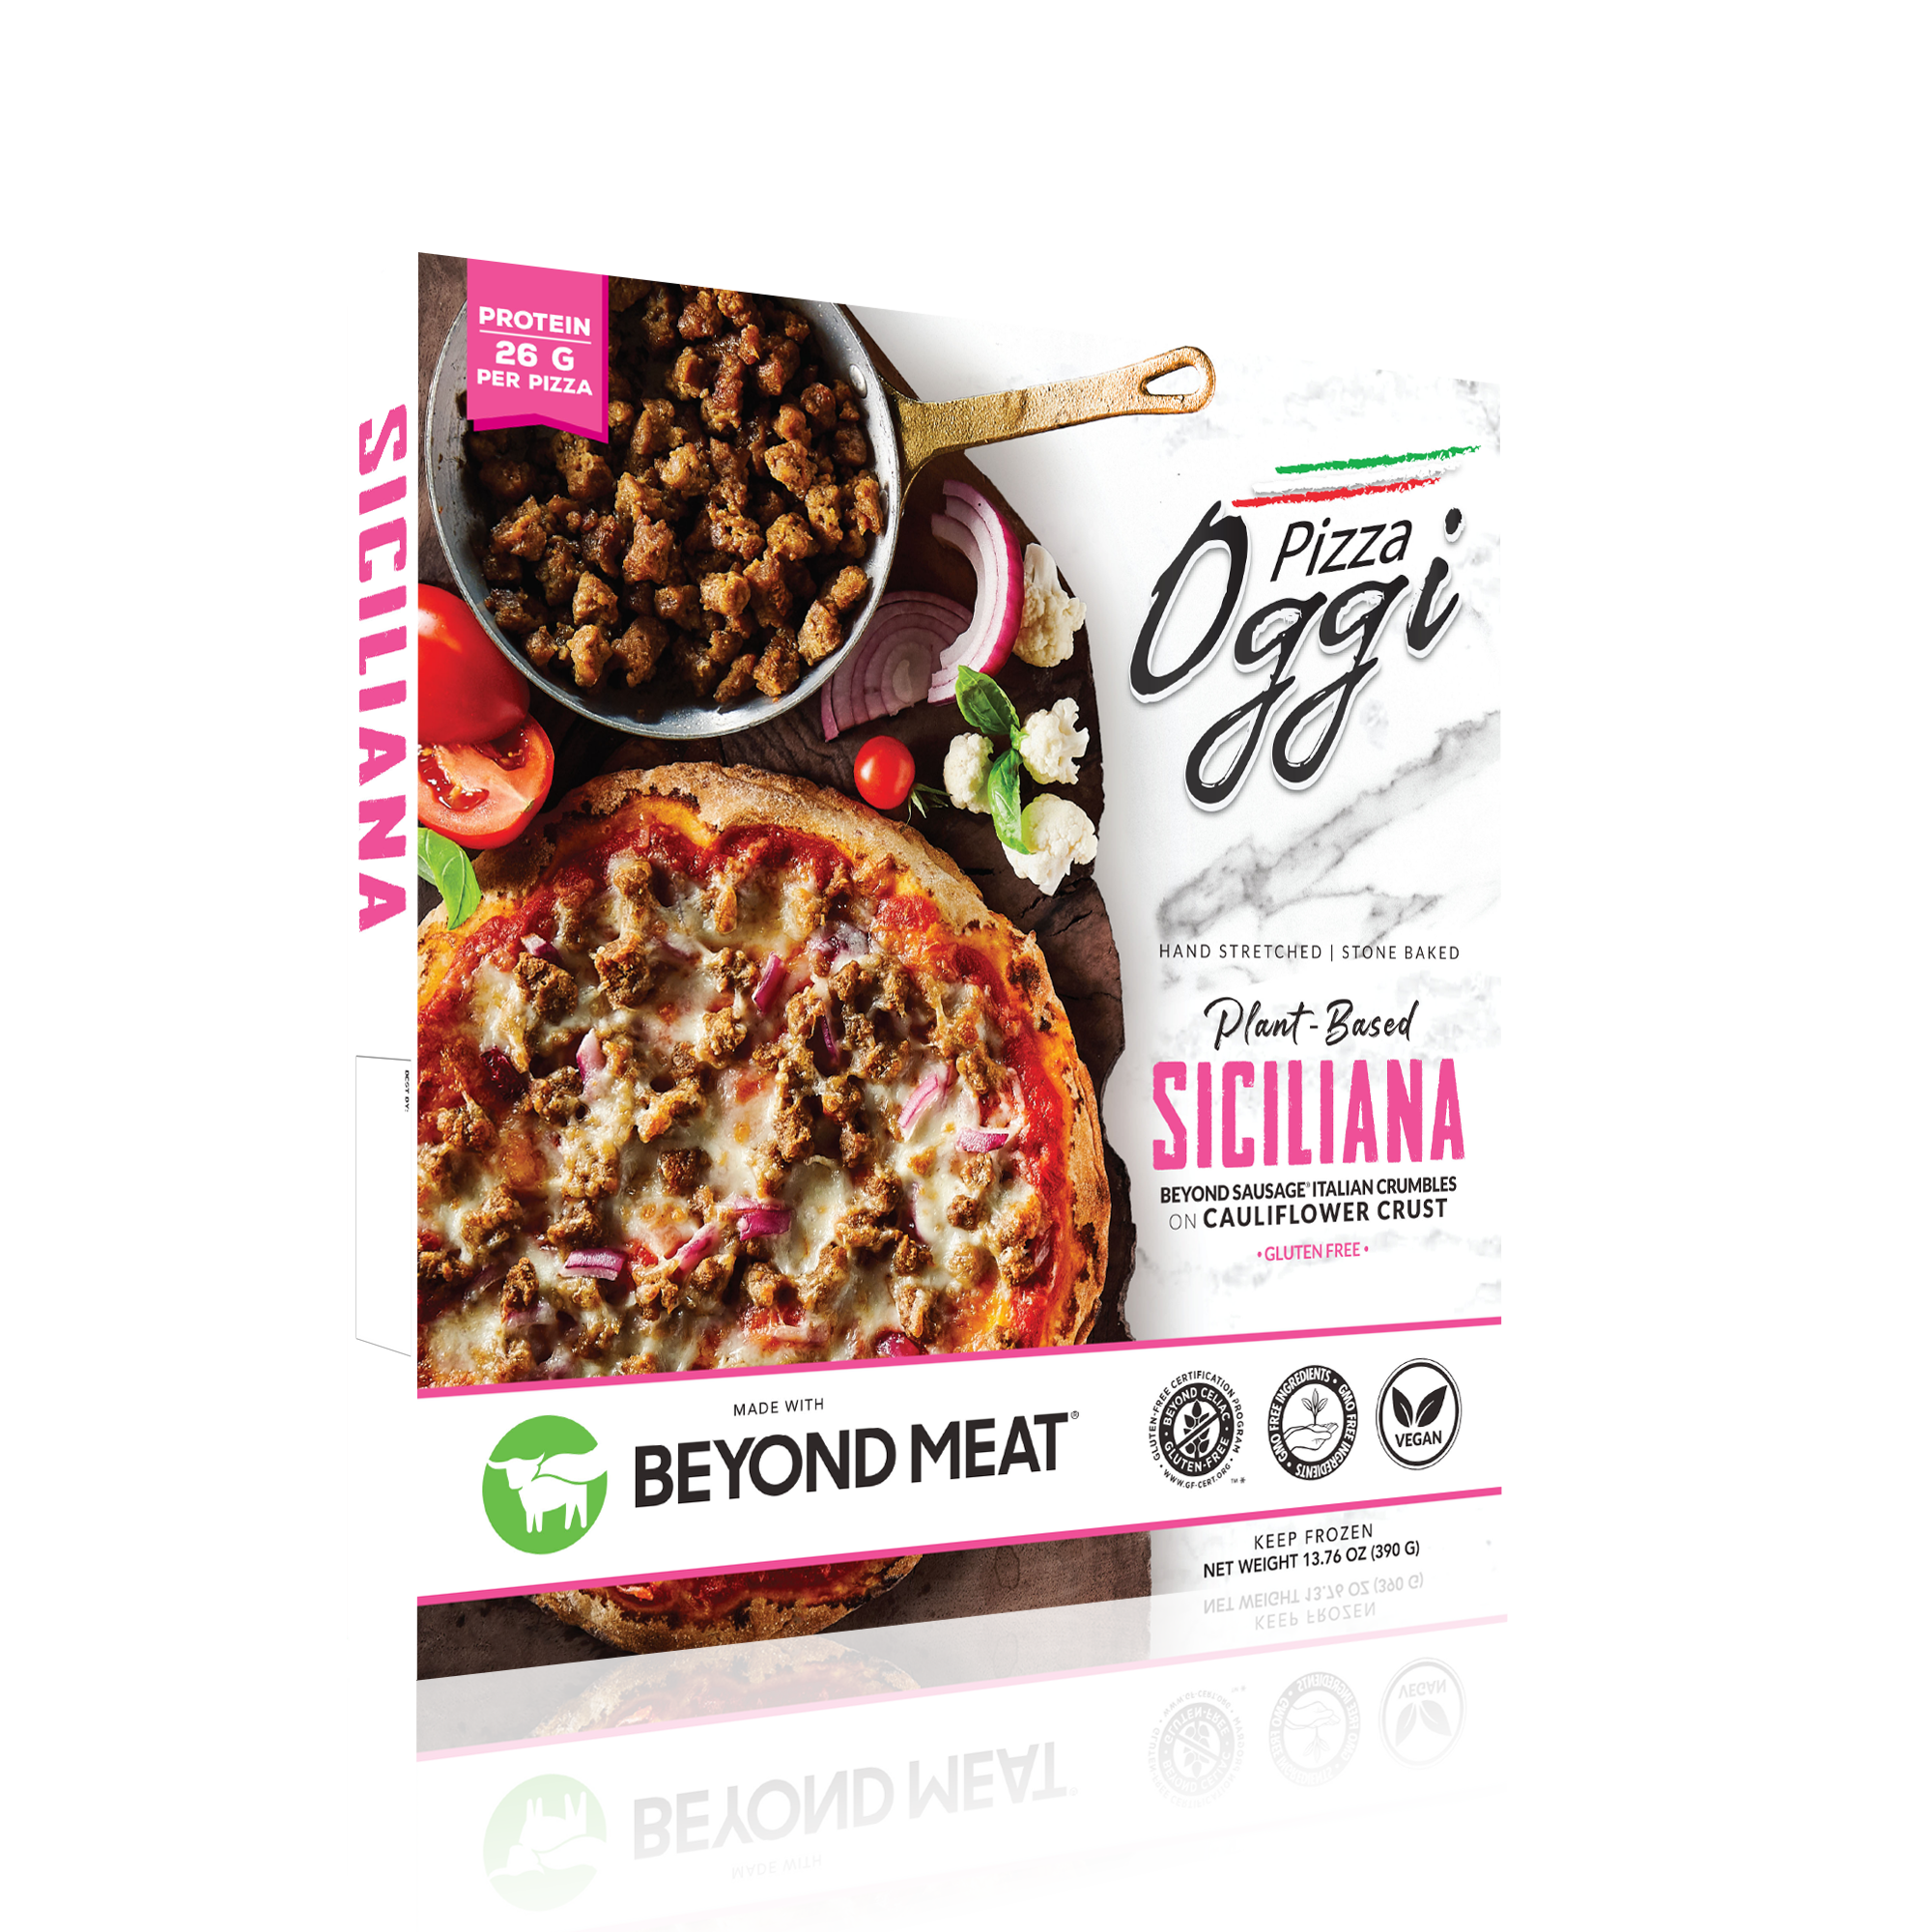 SICILIANA BEYOND MEAT PIZZA product image